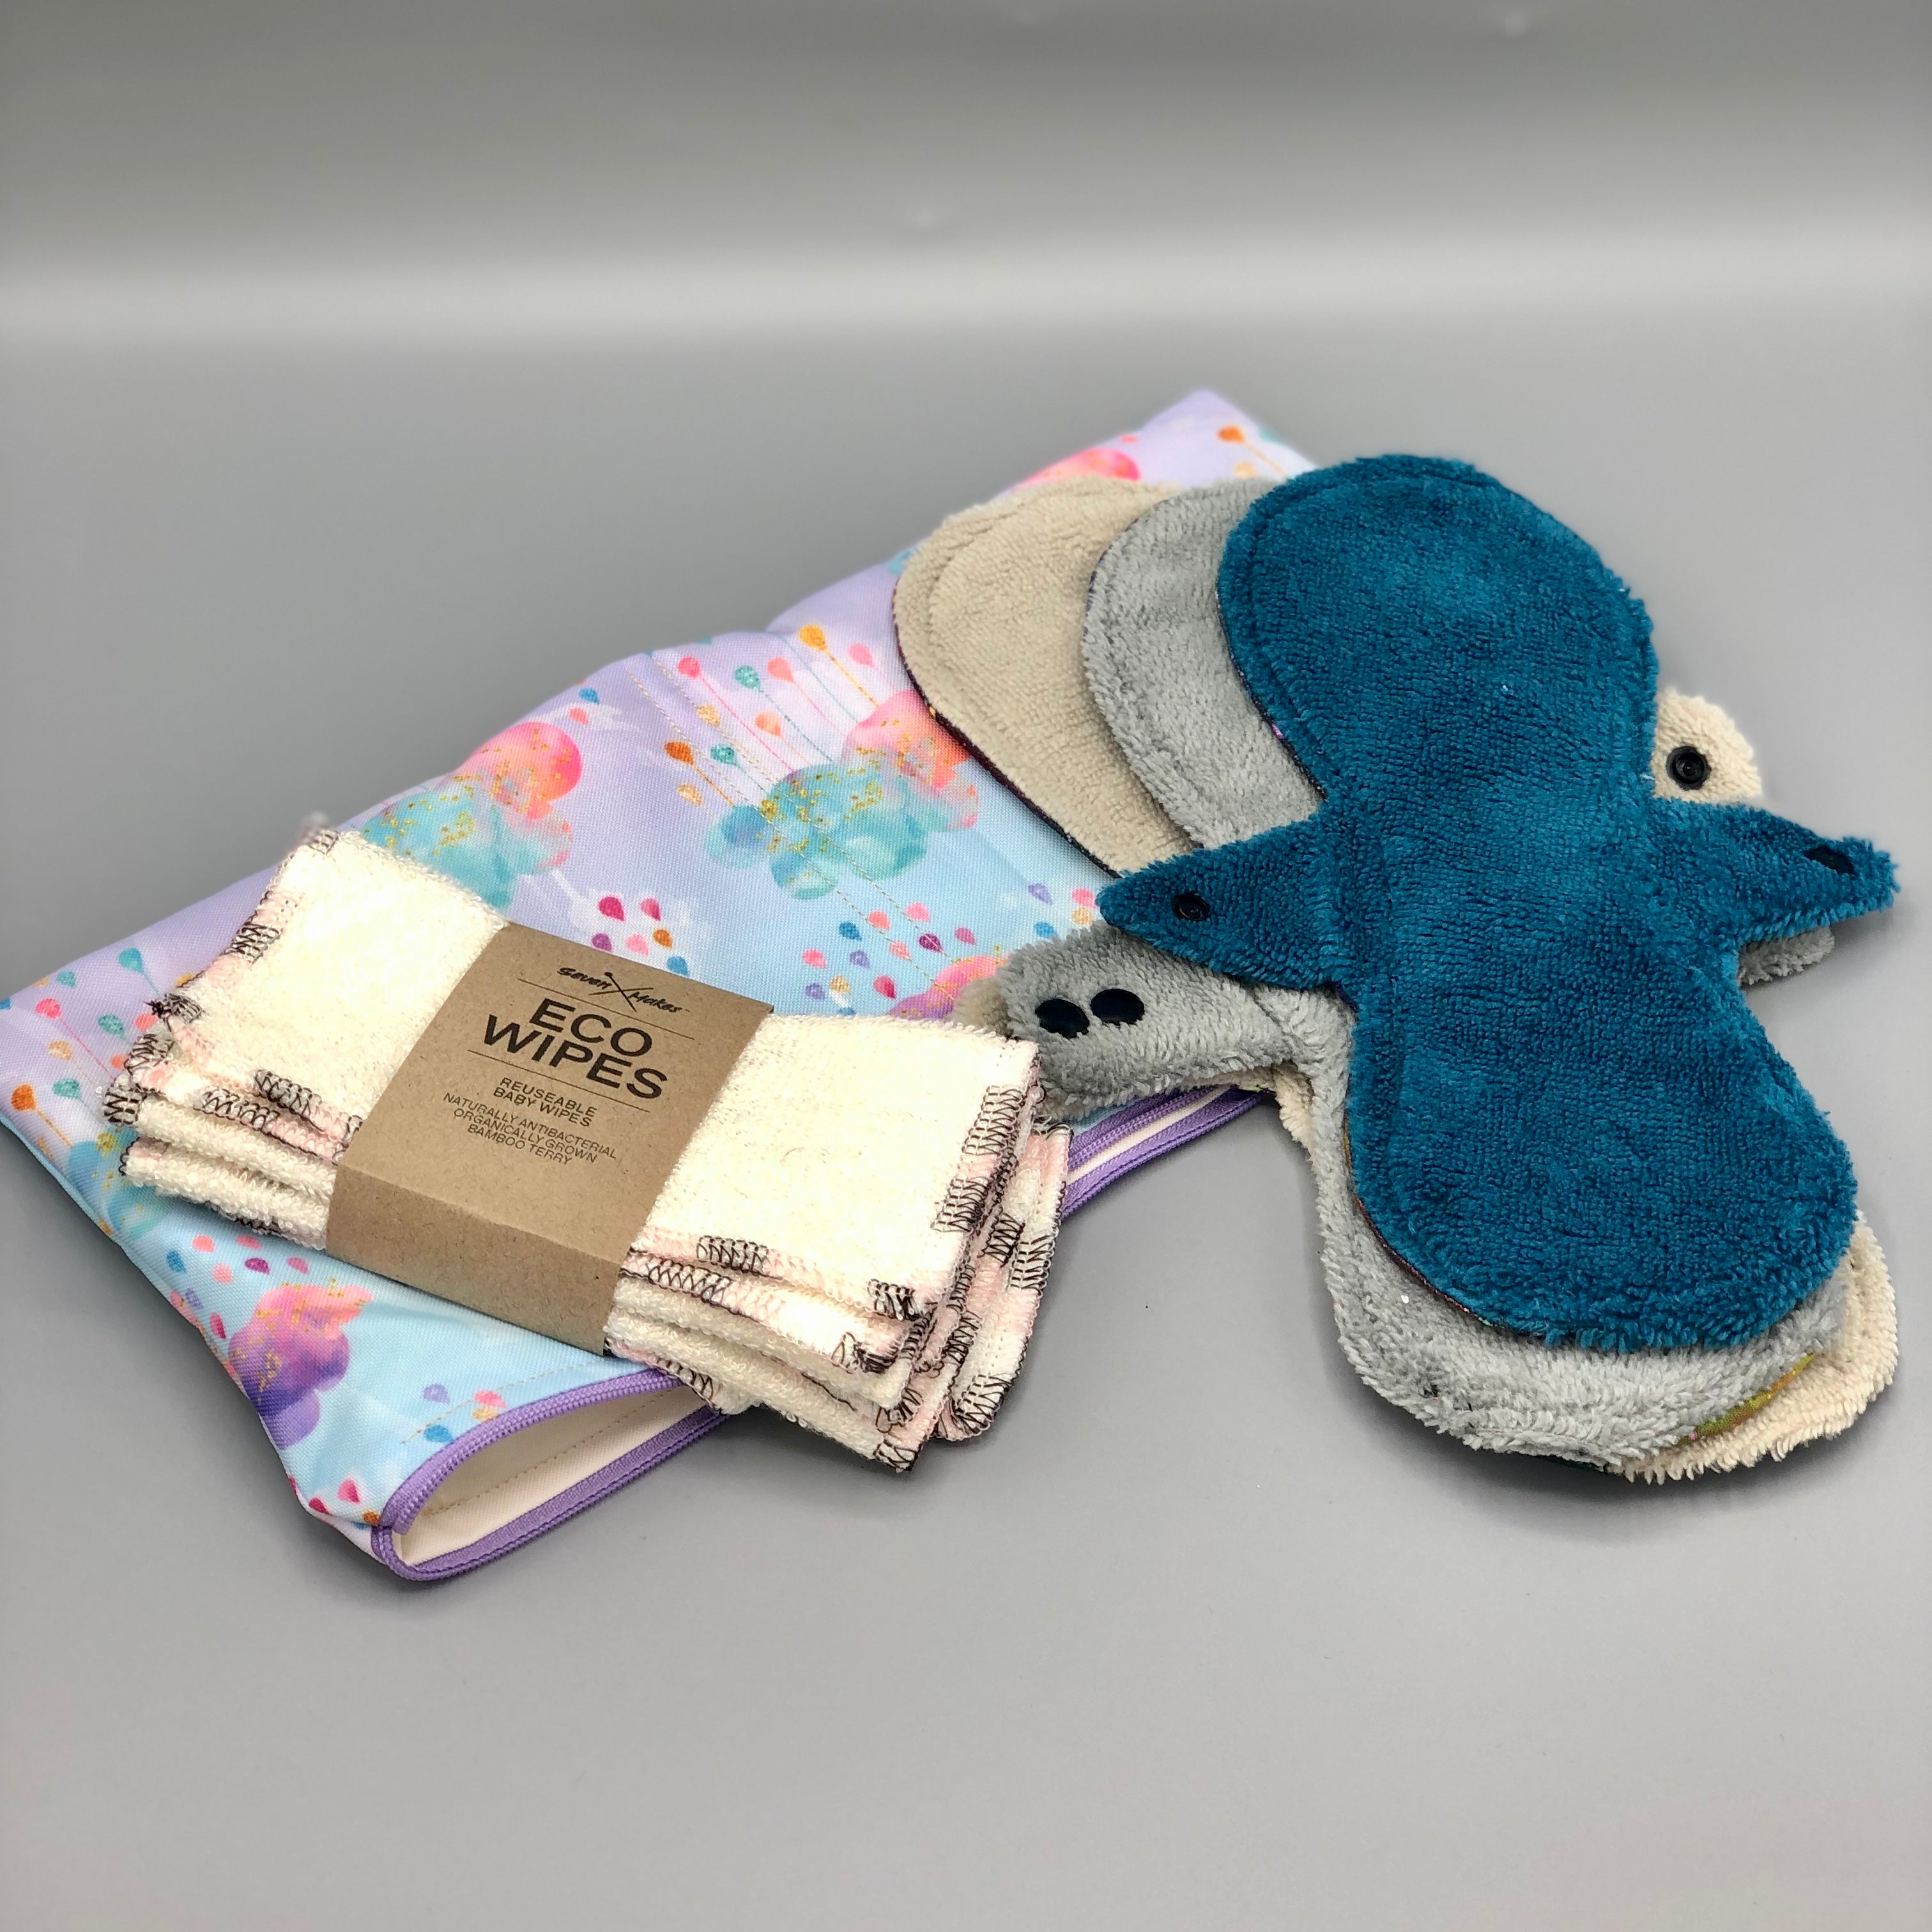 Luxury Reusable Sanitary Pads - super absorbent, eco friendly alternat –  Seven Makes